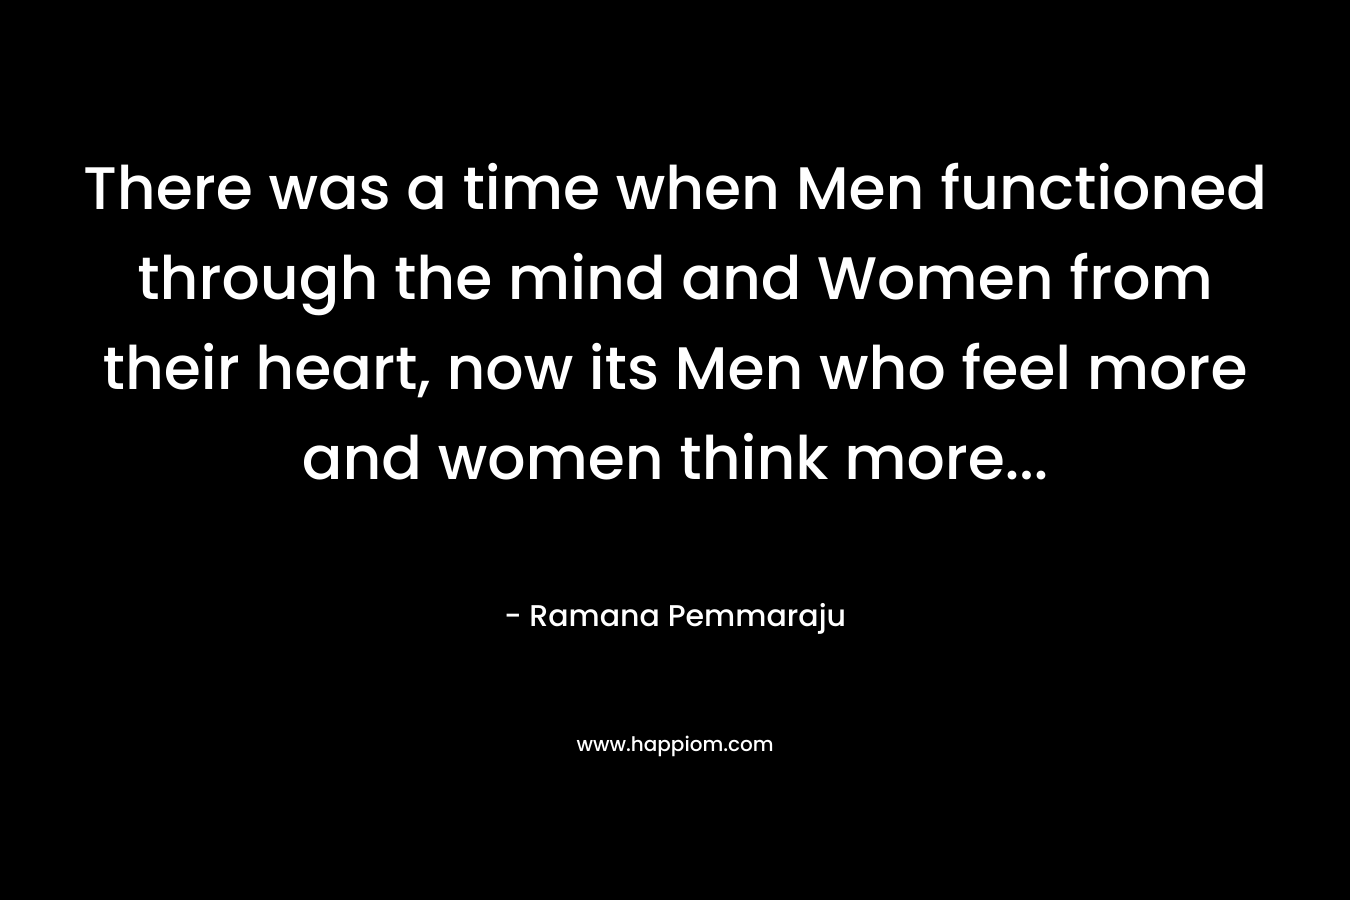 There was a time when Men functioned through the mind and Women from their heart, now its Men who feel more and women think more...